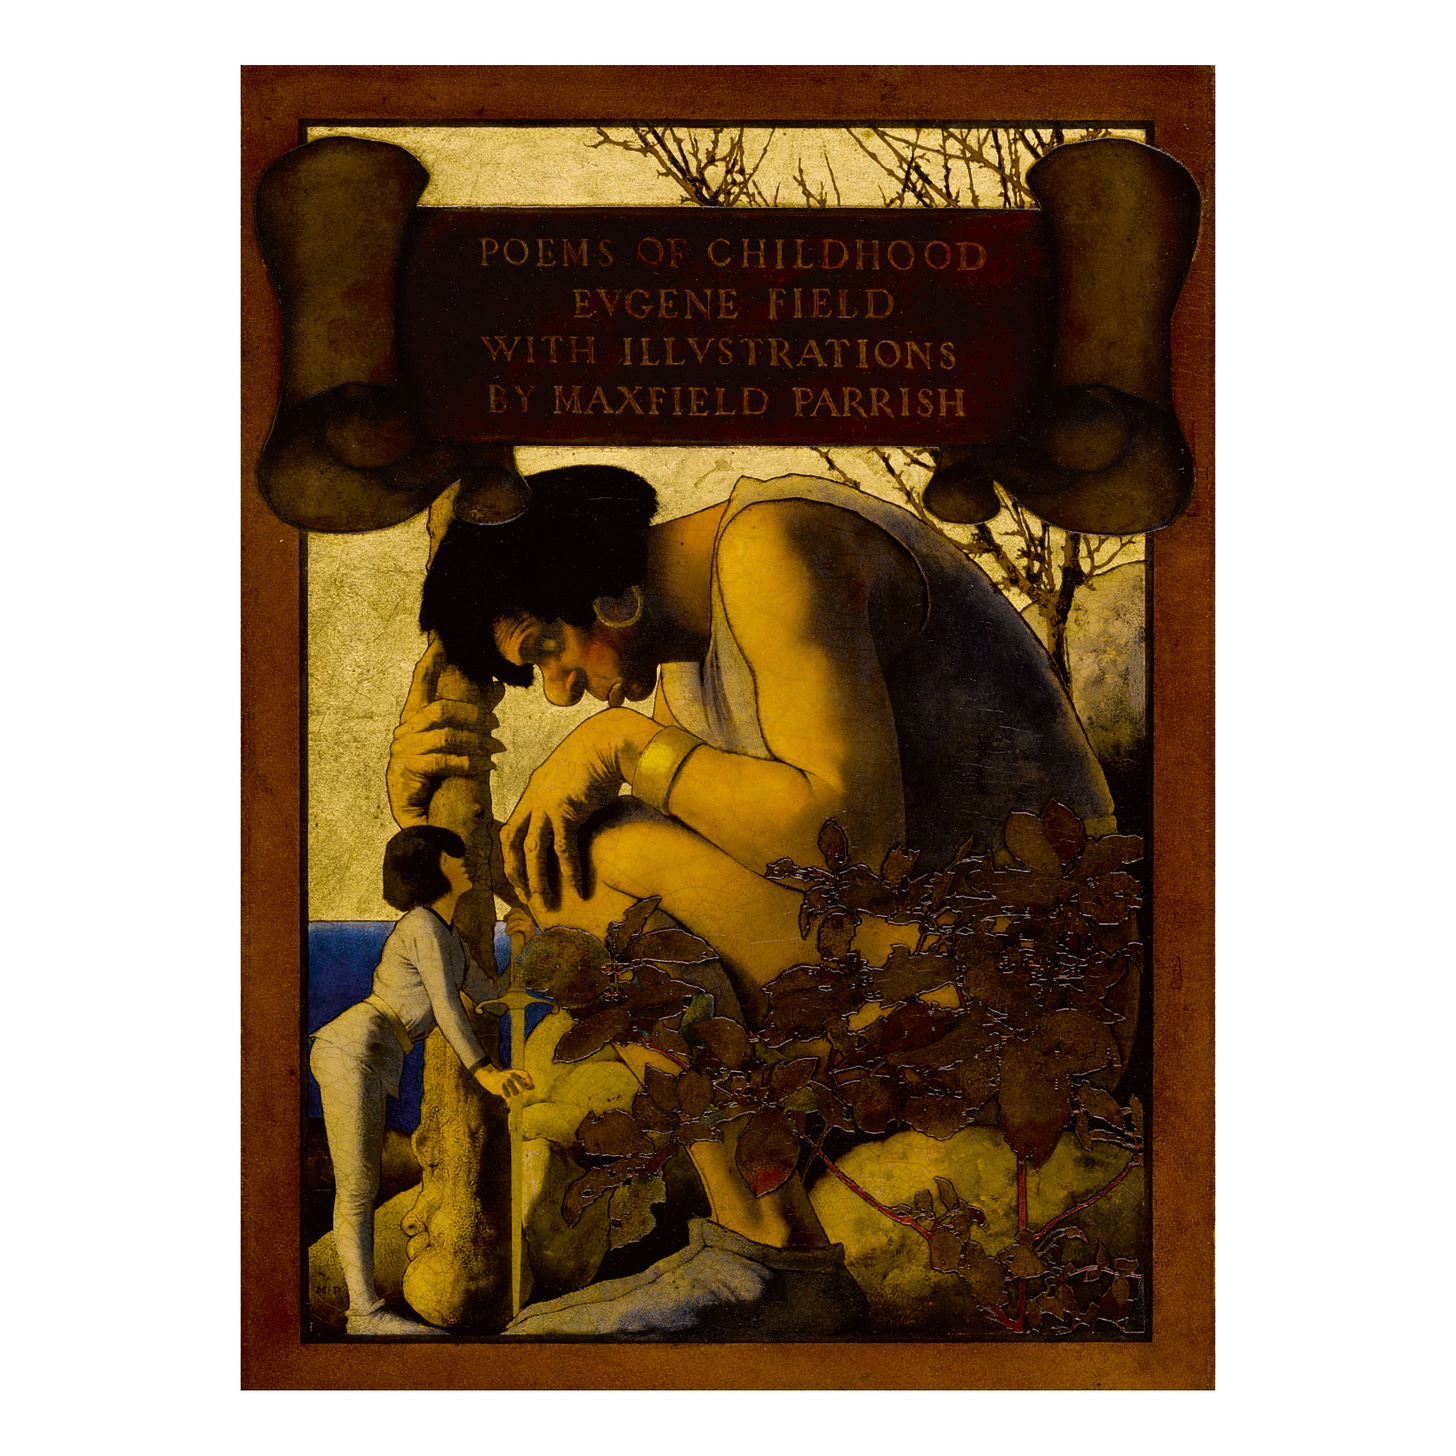 MAXFIELD PARRISH | GIANT WITH JACK AT HIS FEET (POEMS OF CHILDHOOD) |  American Art | American Paintings | Sotheby's